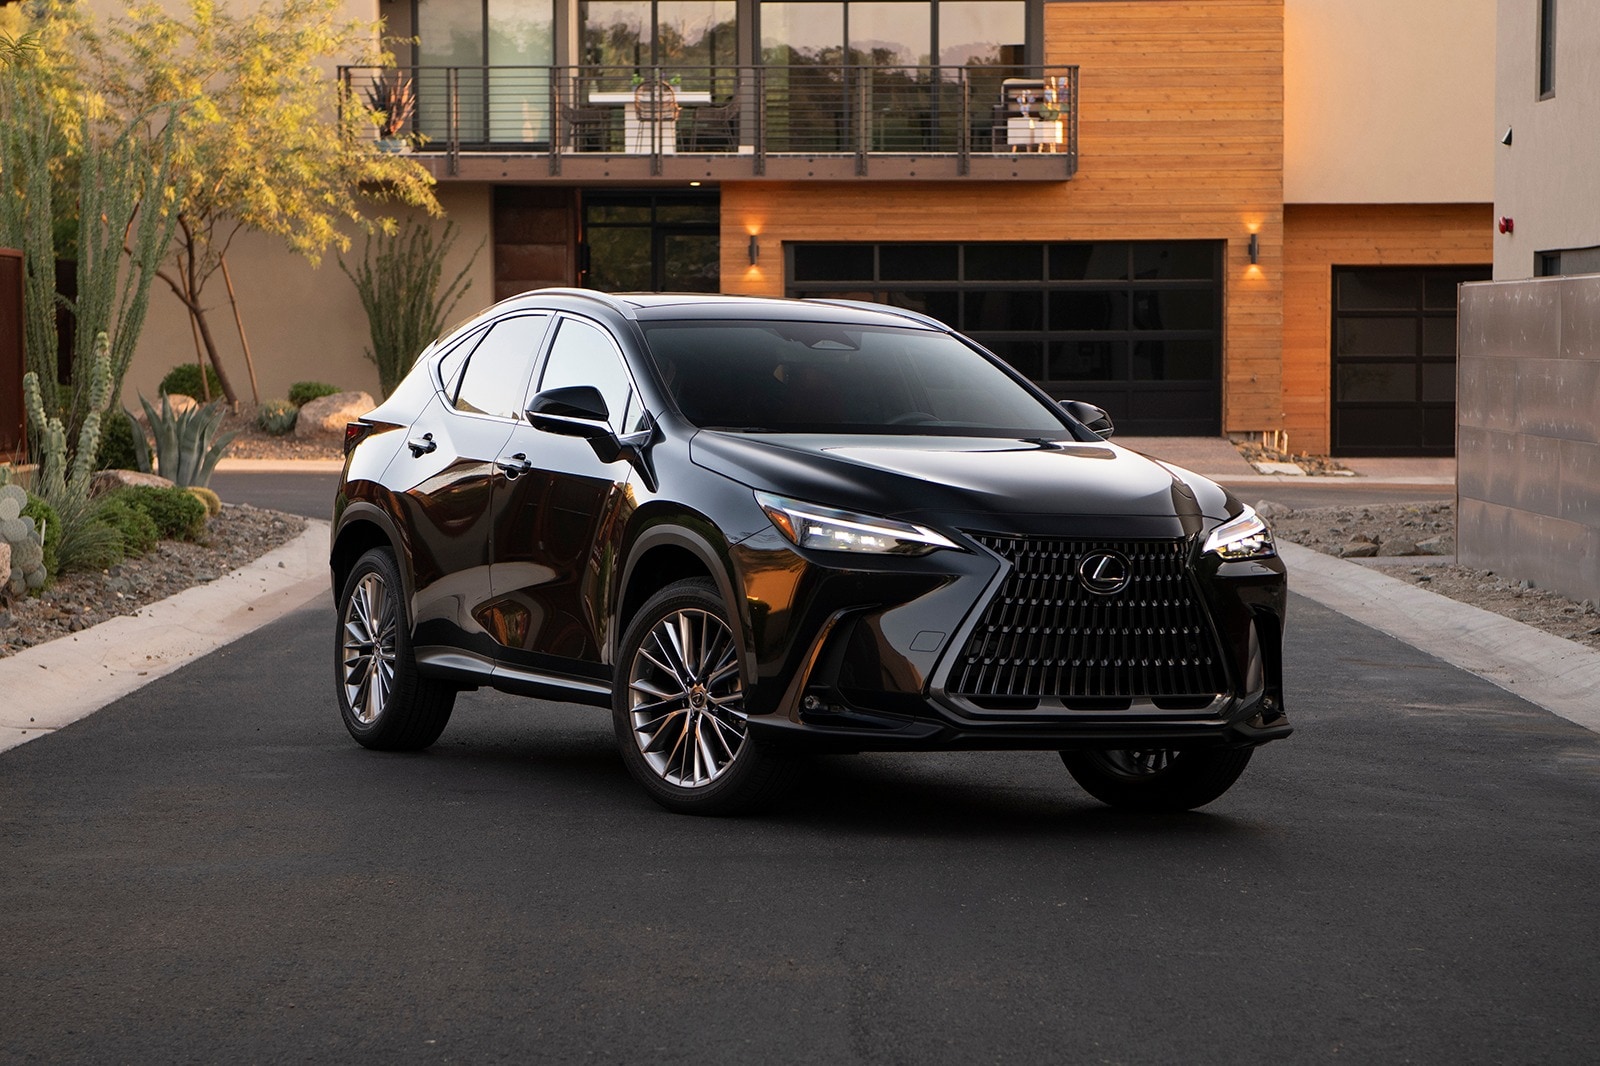 The All-New 2022 Lexus NX 350 Is Sharper, Smarter and More Sensible